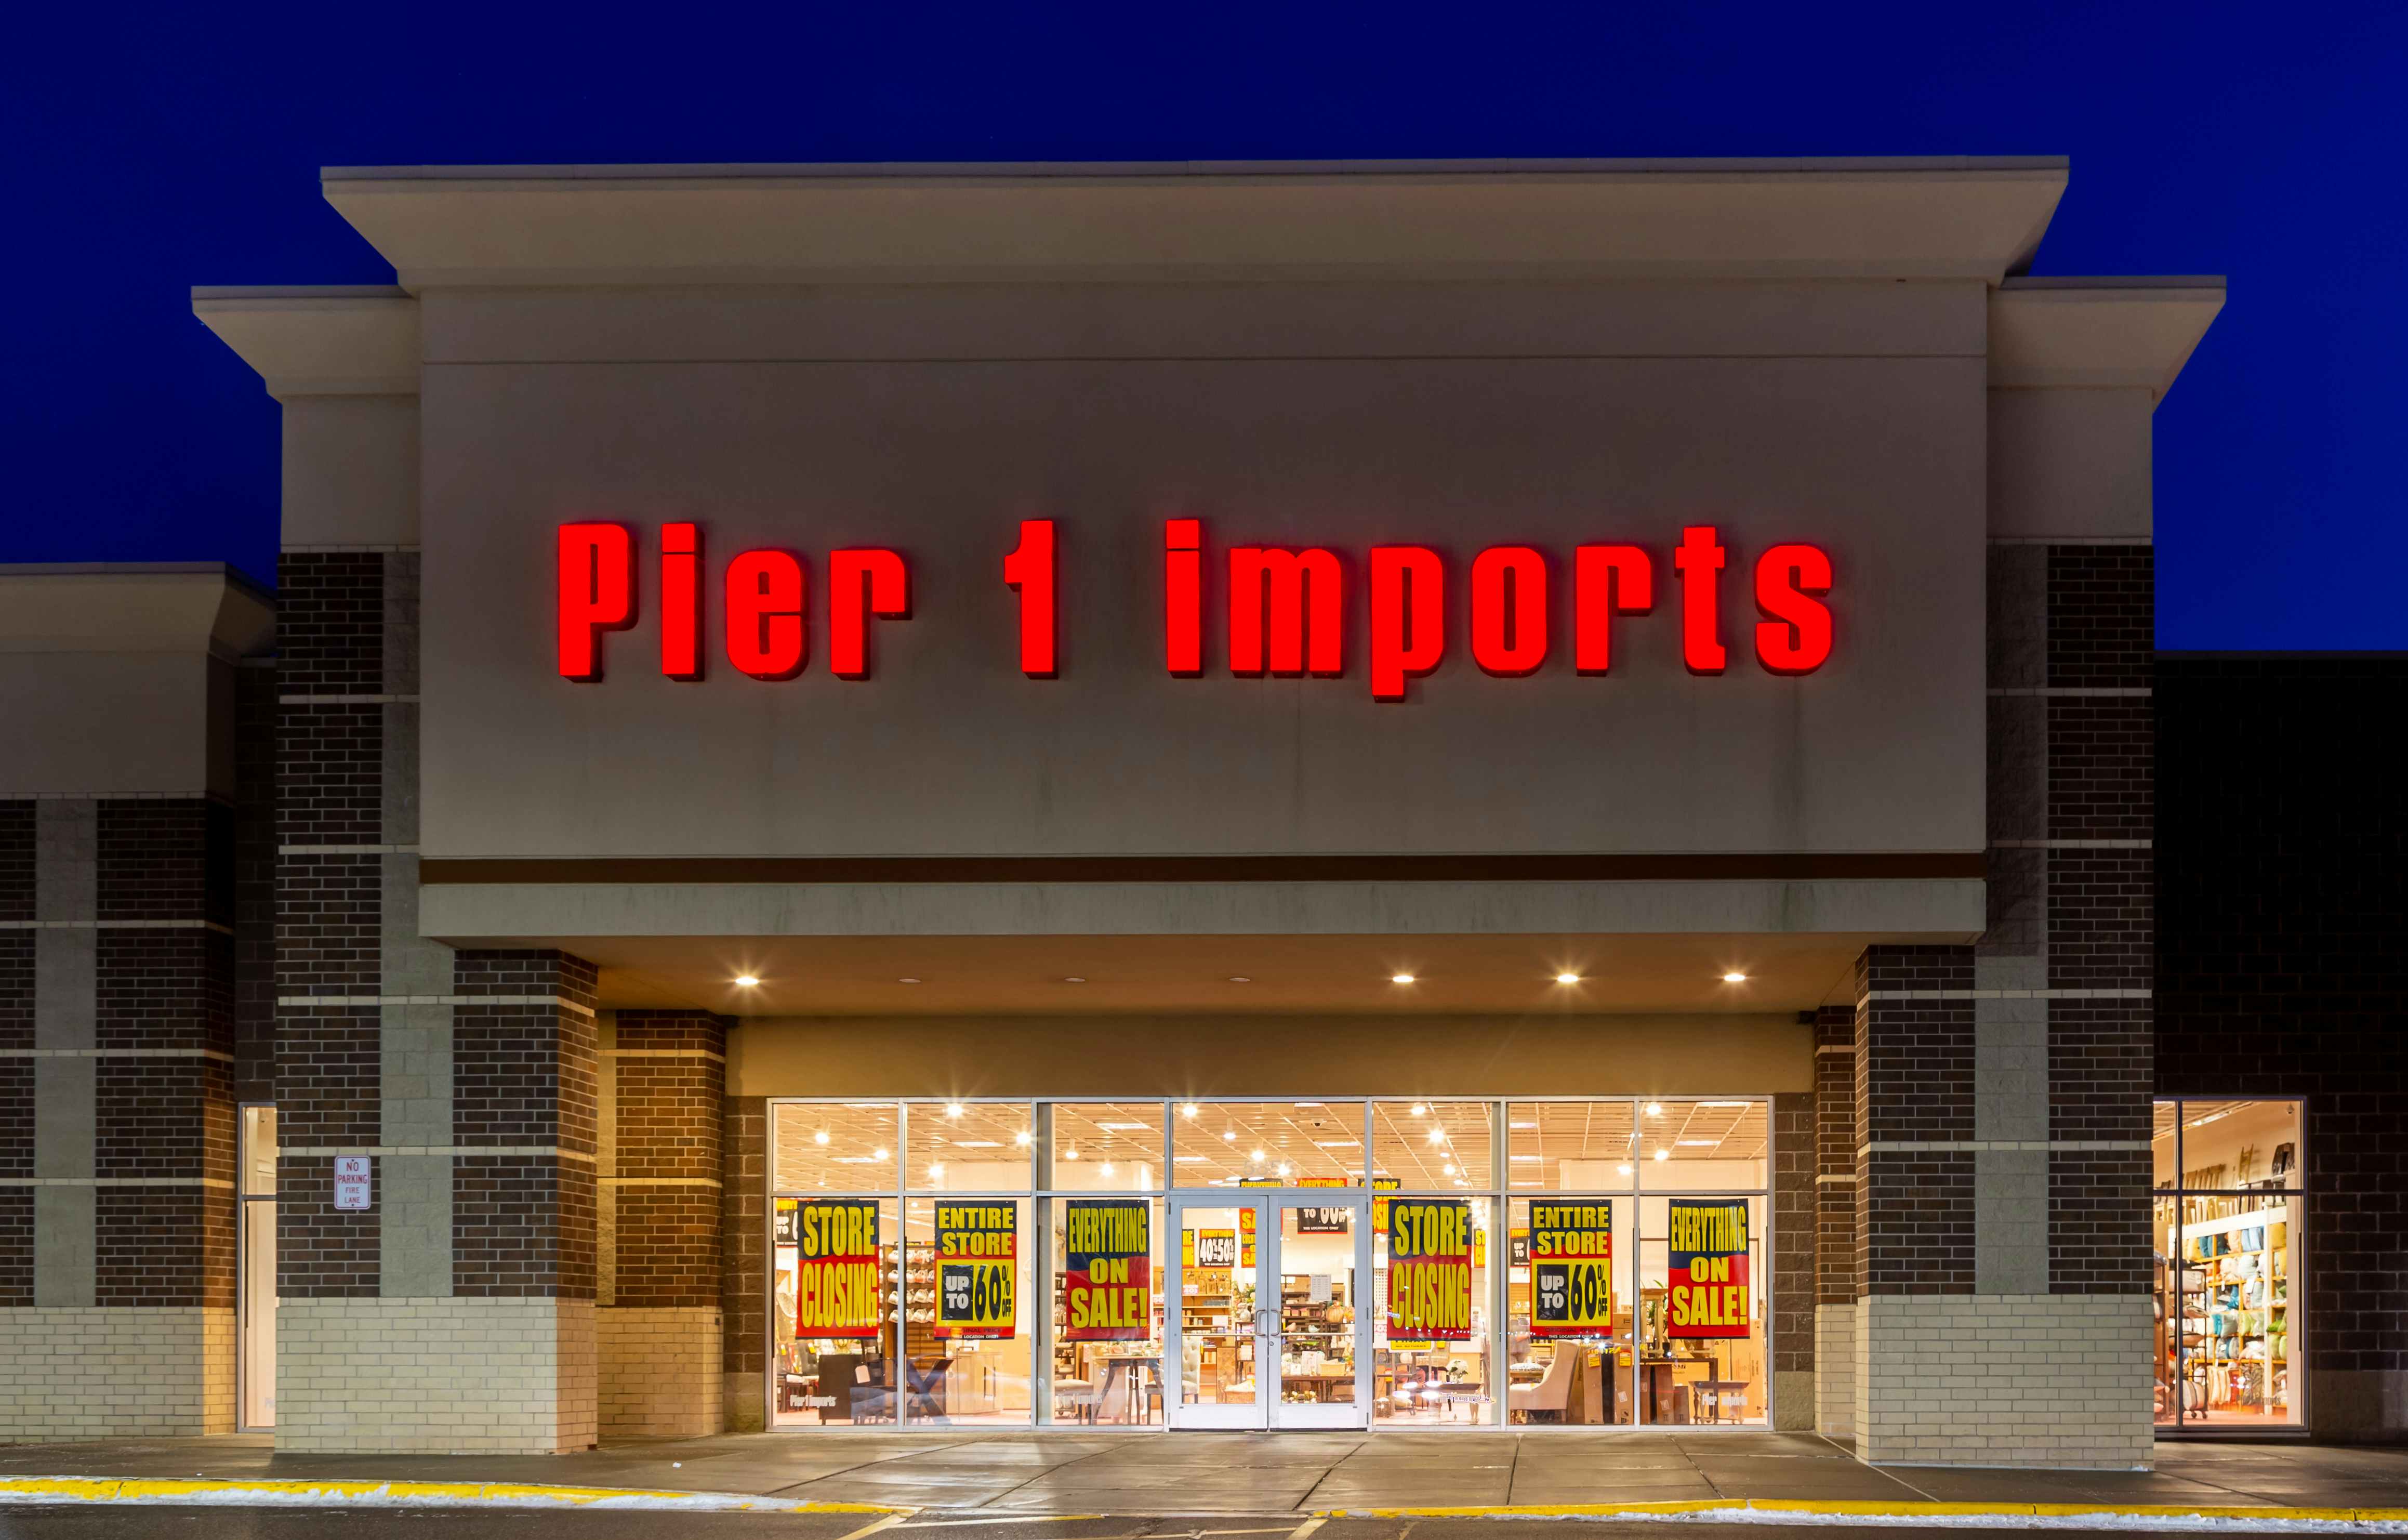 Pier 1 imports store front with "store closing" signs in window.